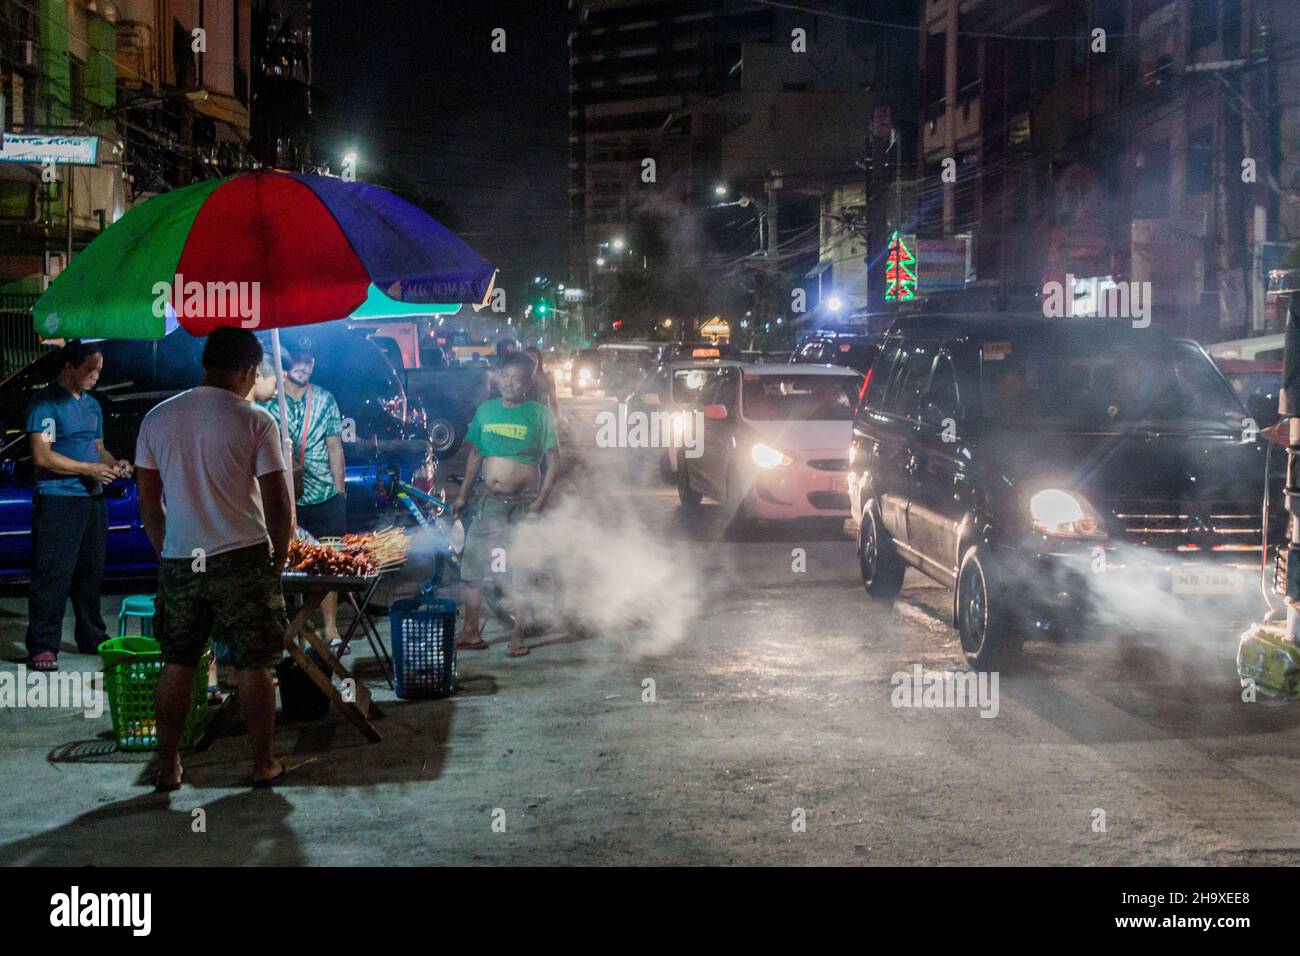 MANILA, PHILIPPINES - JANUARY 20, 2018: Night view of a street with a food stall in Manila. Stock Photo